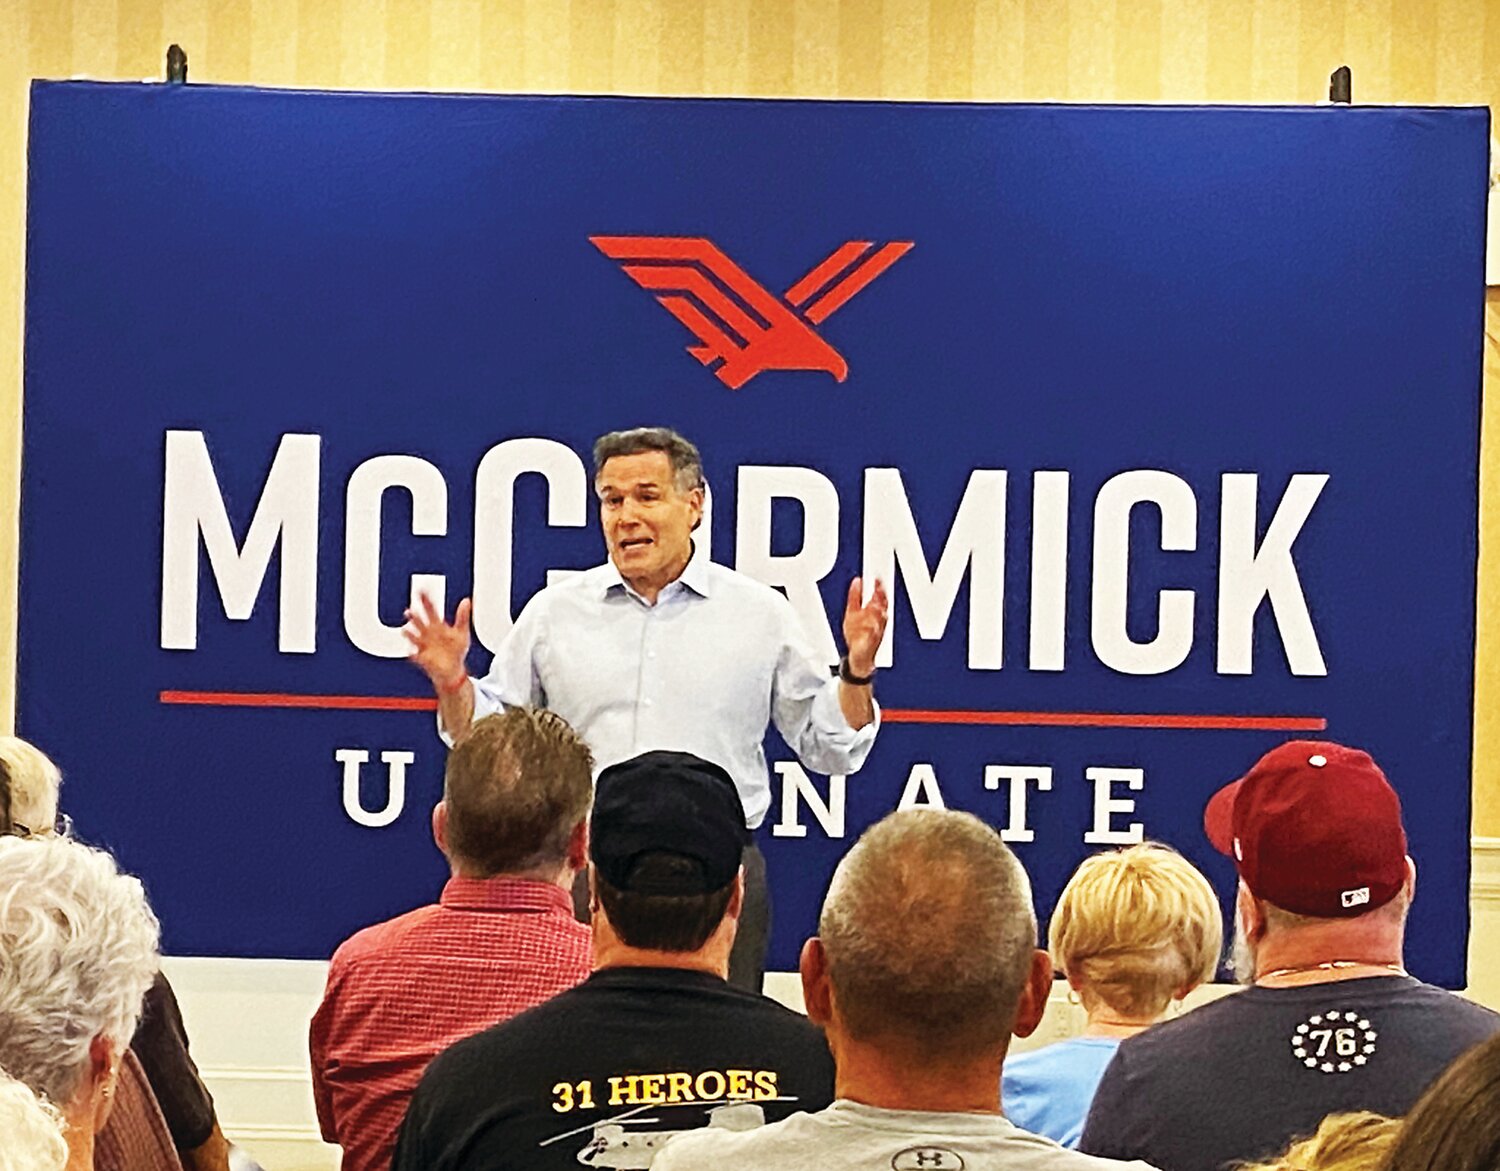 Republican U.S. Senate candidate Dave McCormick came to Doylestown Tuesday to rally support for his race against Sen. Bob Casey. He spoke at Bucks County Republican Committee headquarters in Doylestown.